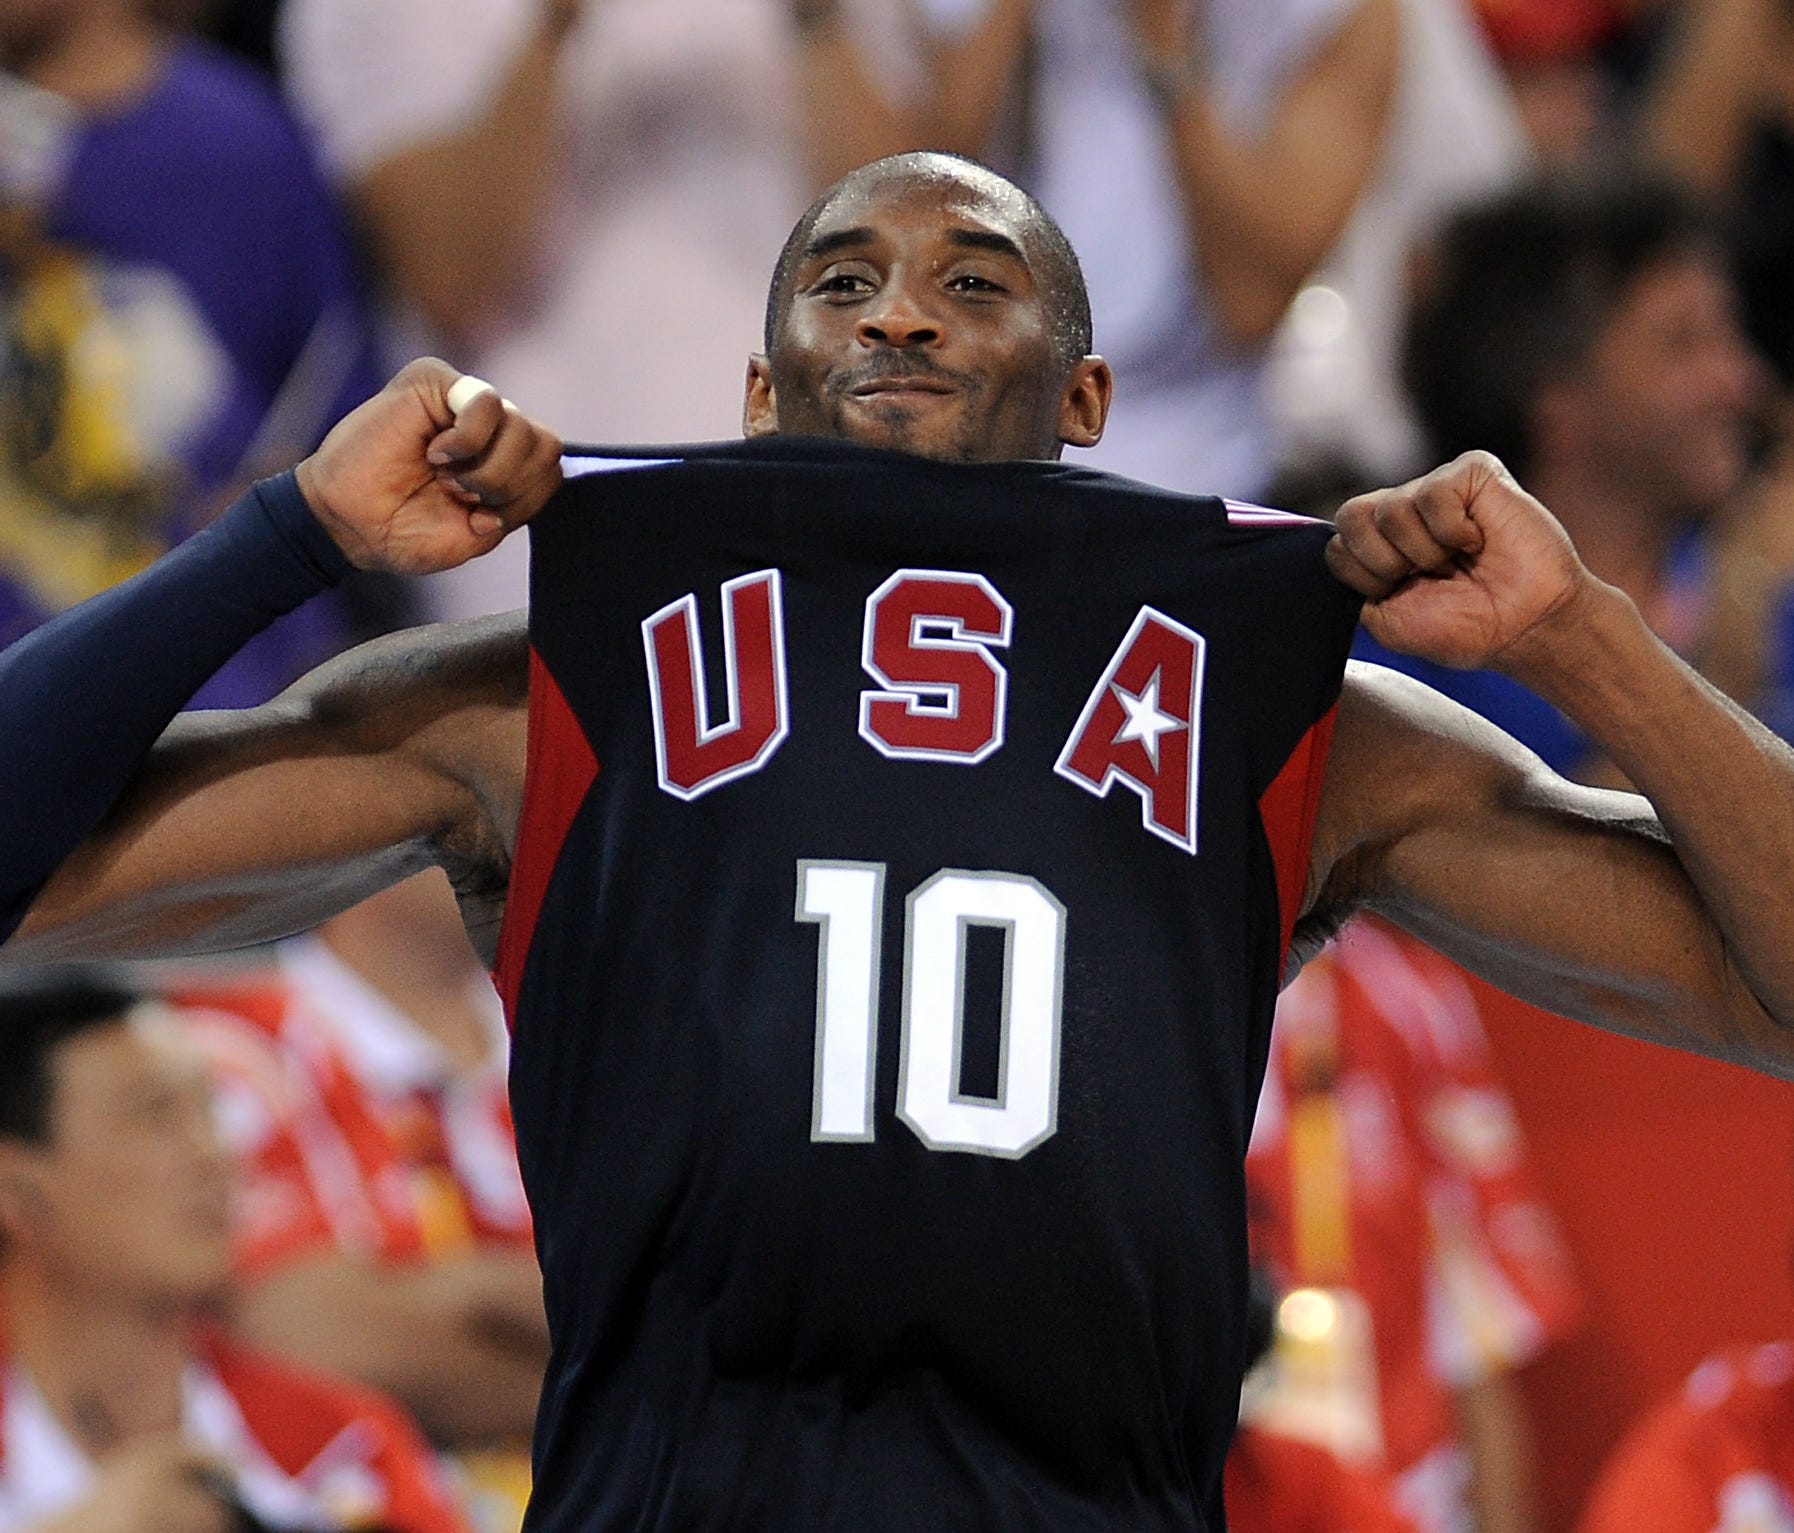 Mamba memories: Reliving the top 10 moments of Kobe Bryant's career